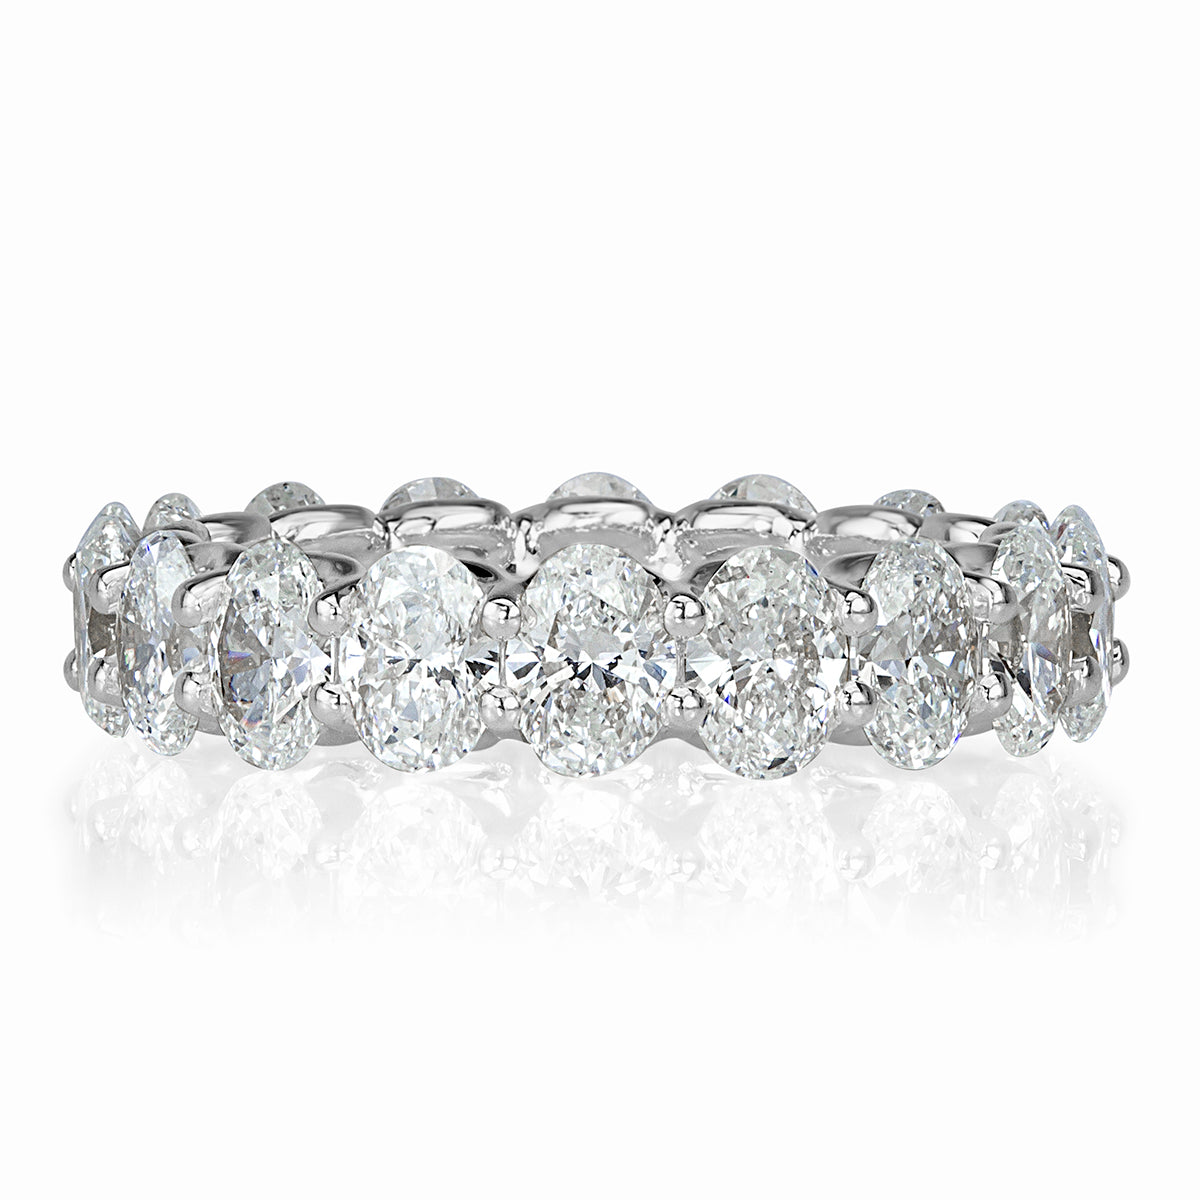 Let Mark Broumand’s team help you find the diamond eternity band that can represent your unending love for your partner.